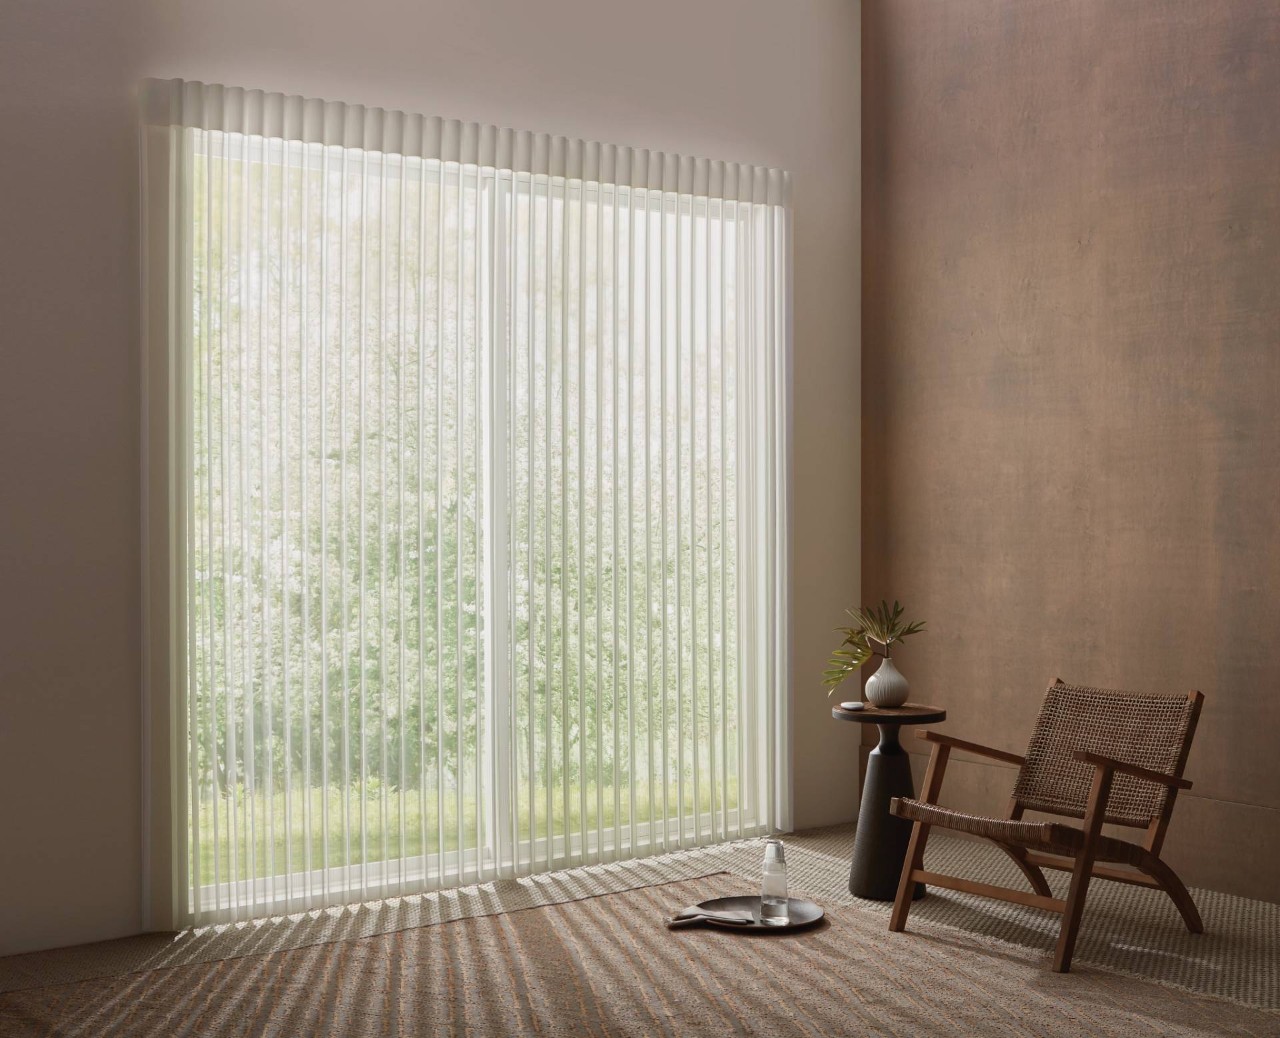 Motorized shades from Hunter Douglas, PowerView® Automation installed on shades near Richardson, TX